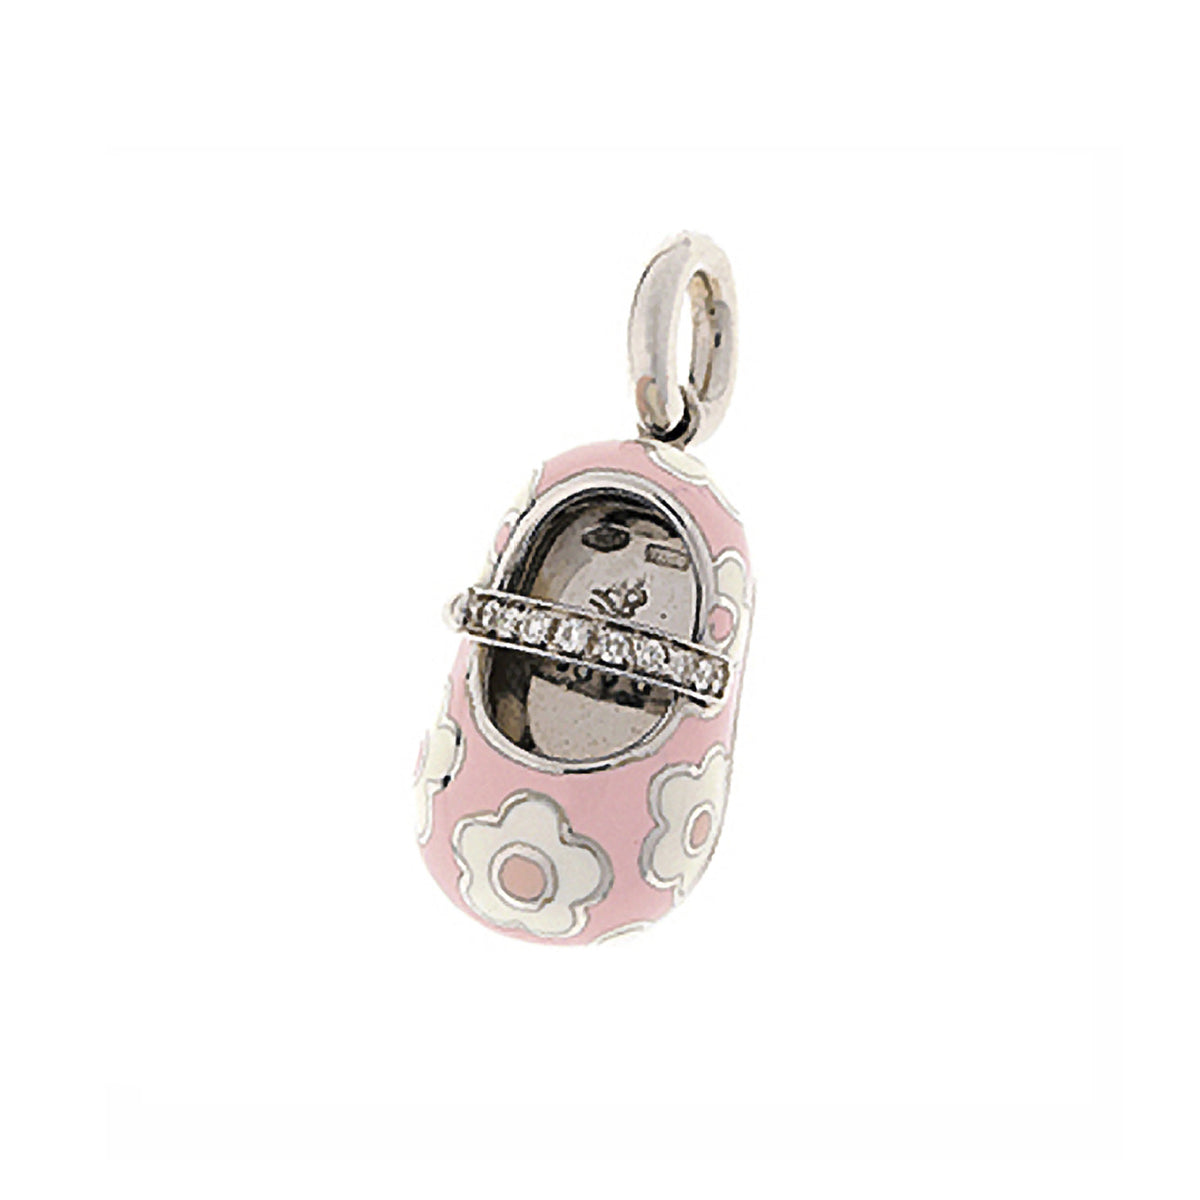 18K White Gold & Pink Shoe Charm with White Flowers